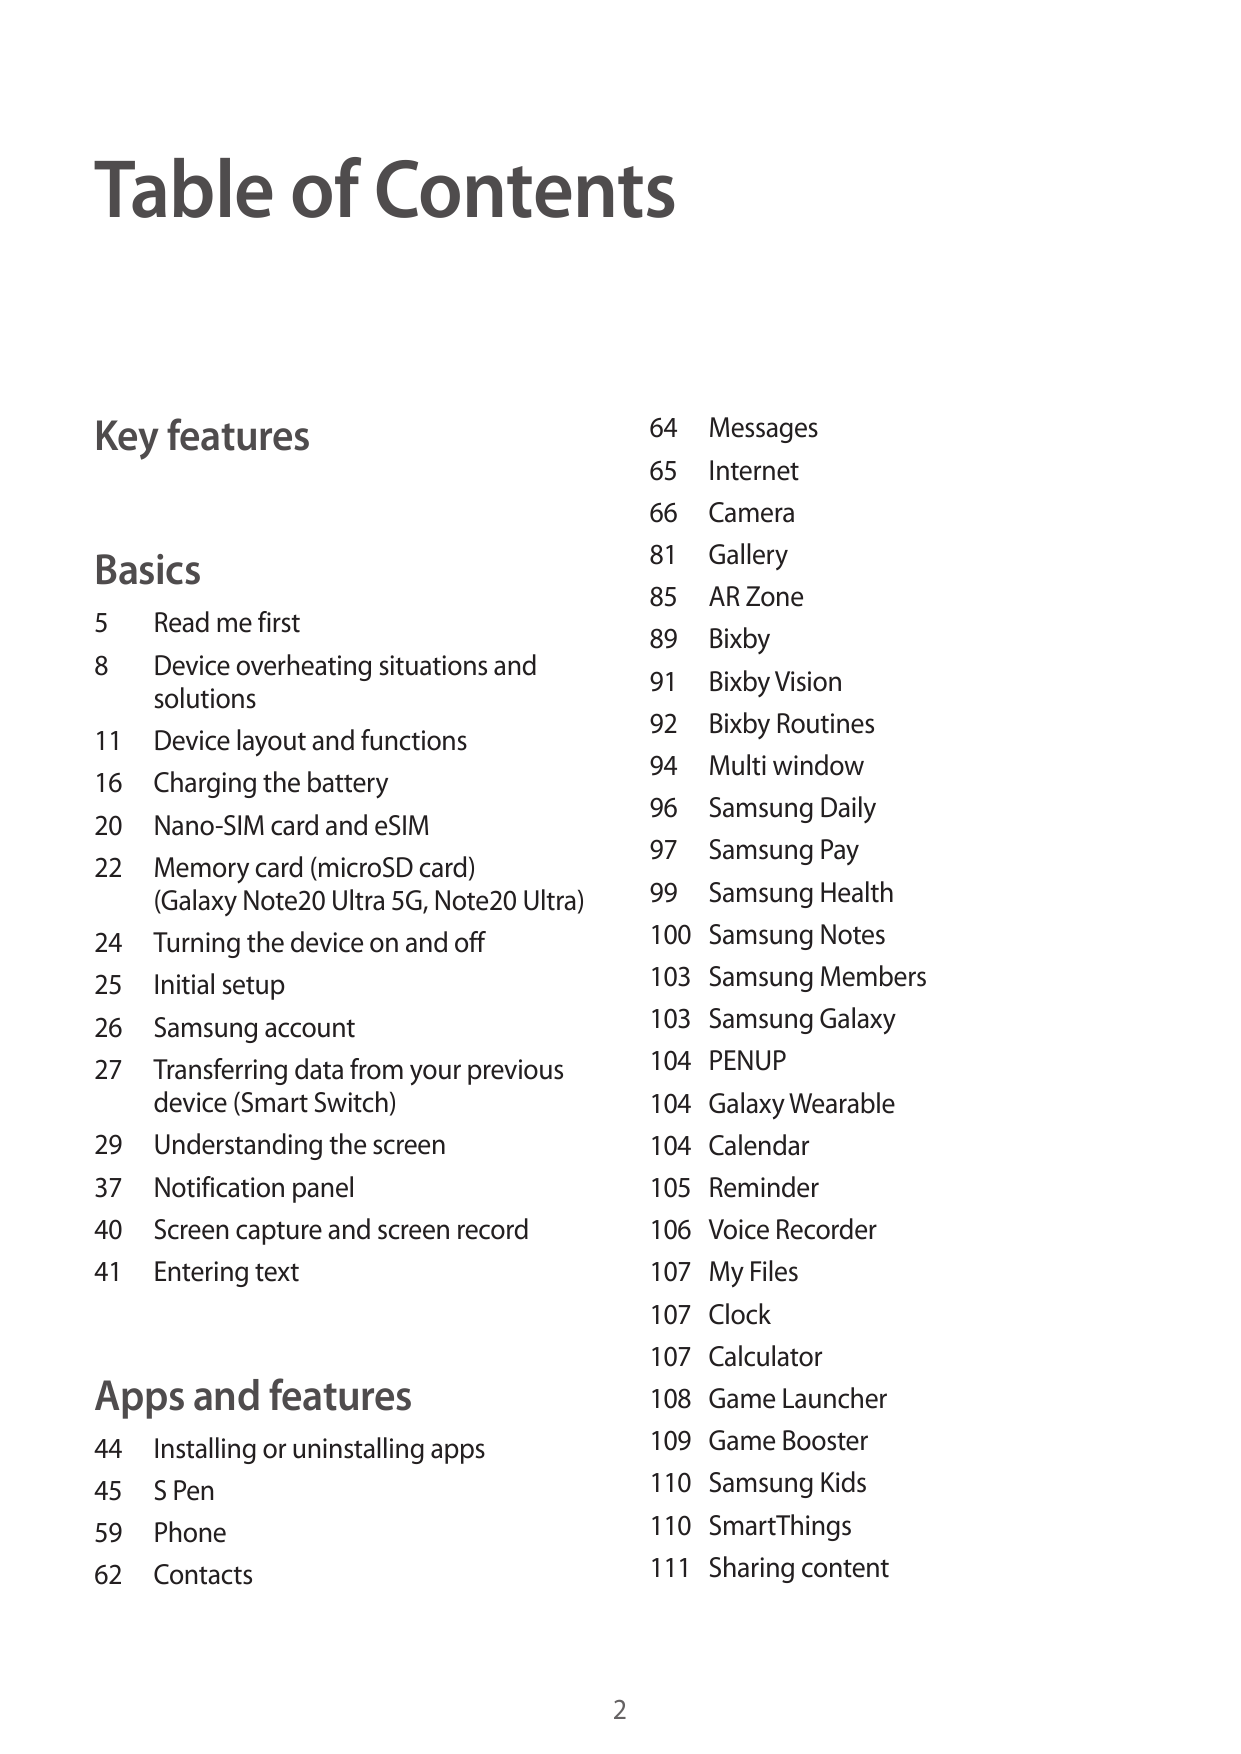 Table of ContentsKey features64Messages65Internet66Camera81Gallery85 AR Zone89Bixby91 Bixby Vision92 Bixby Routines94 Multi wind